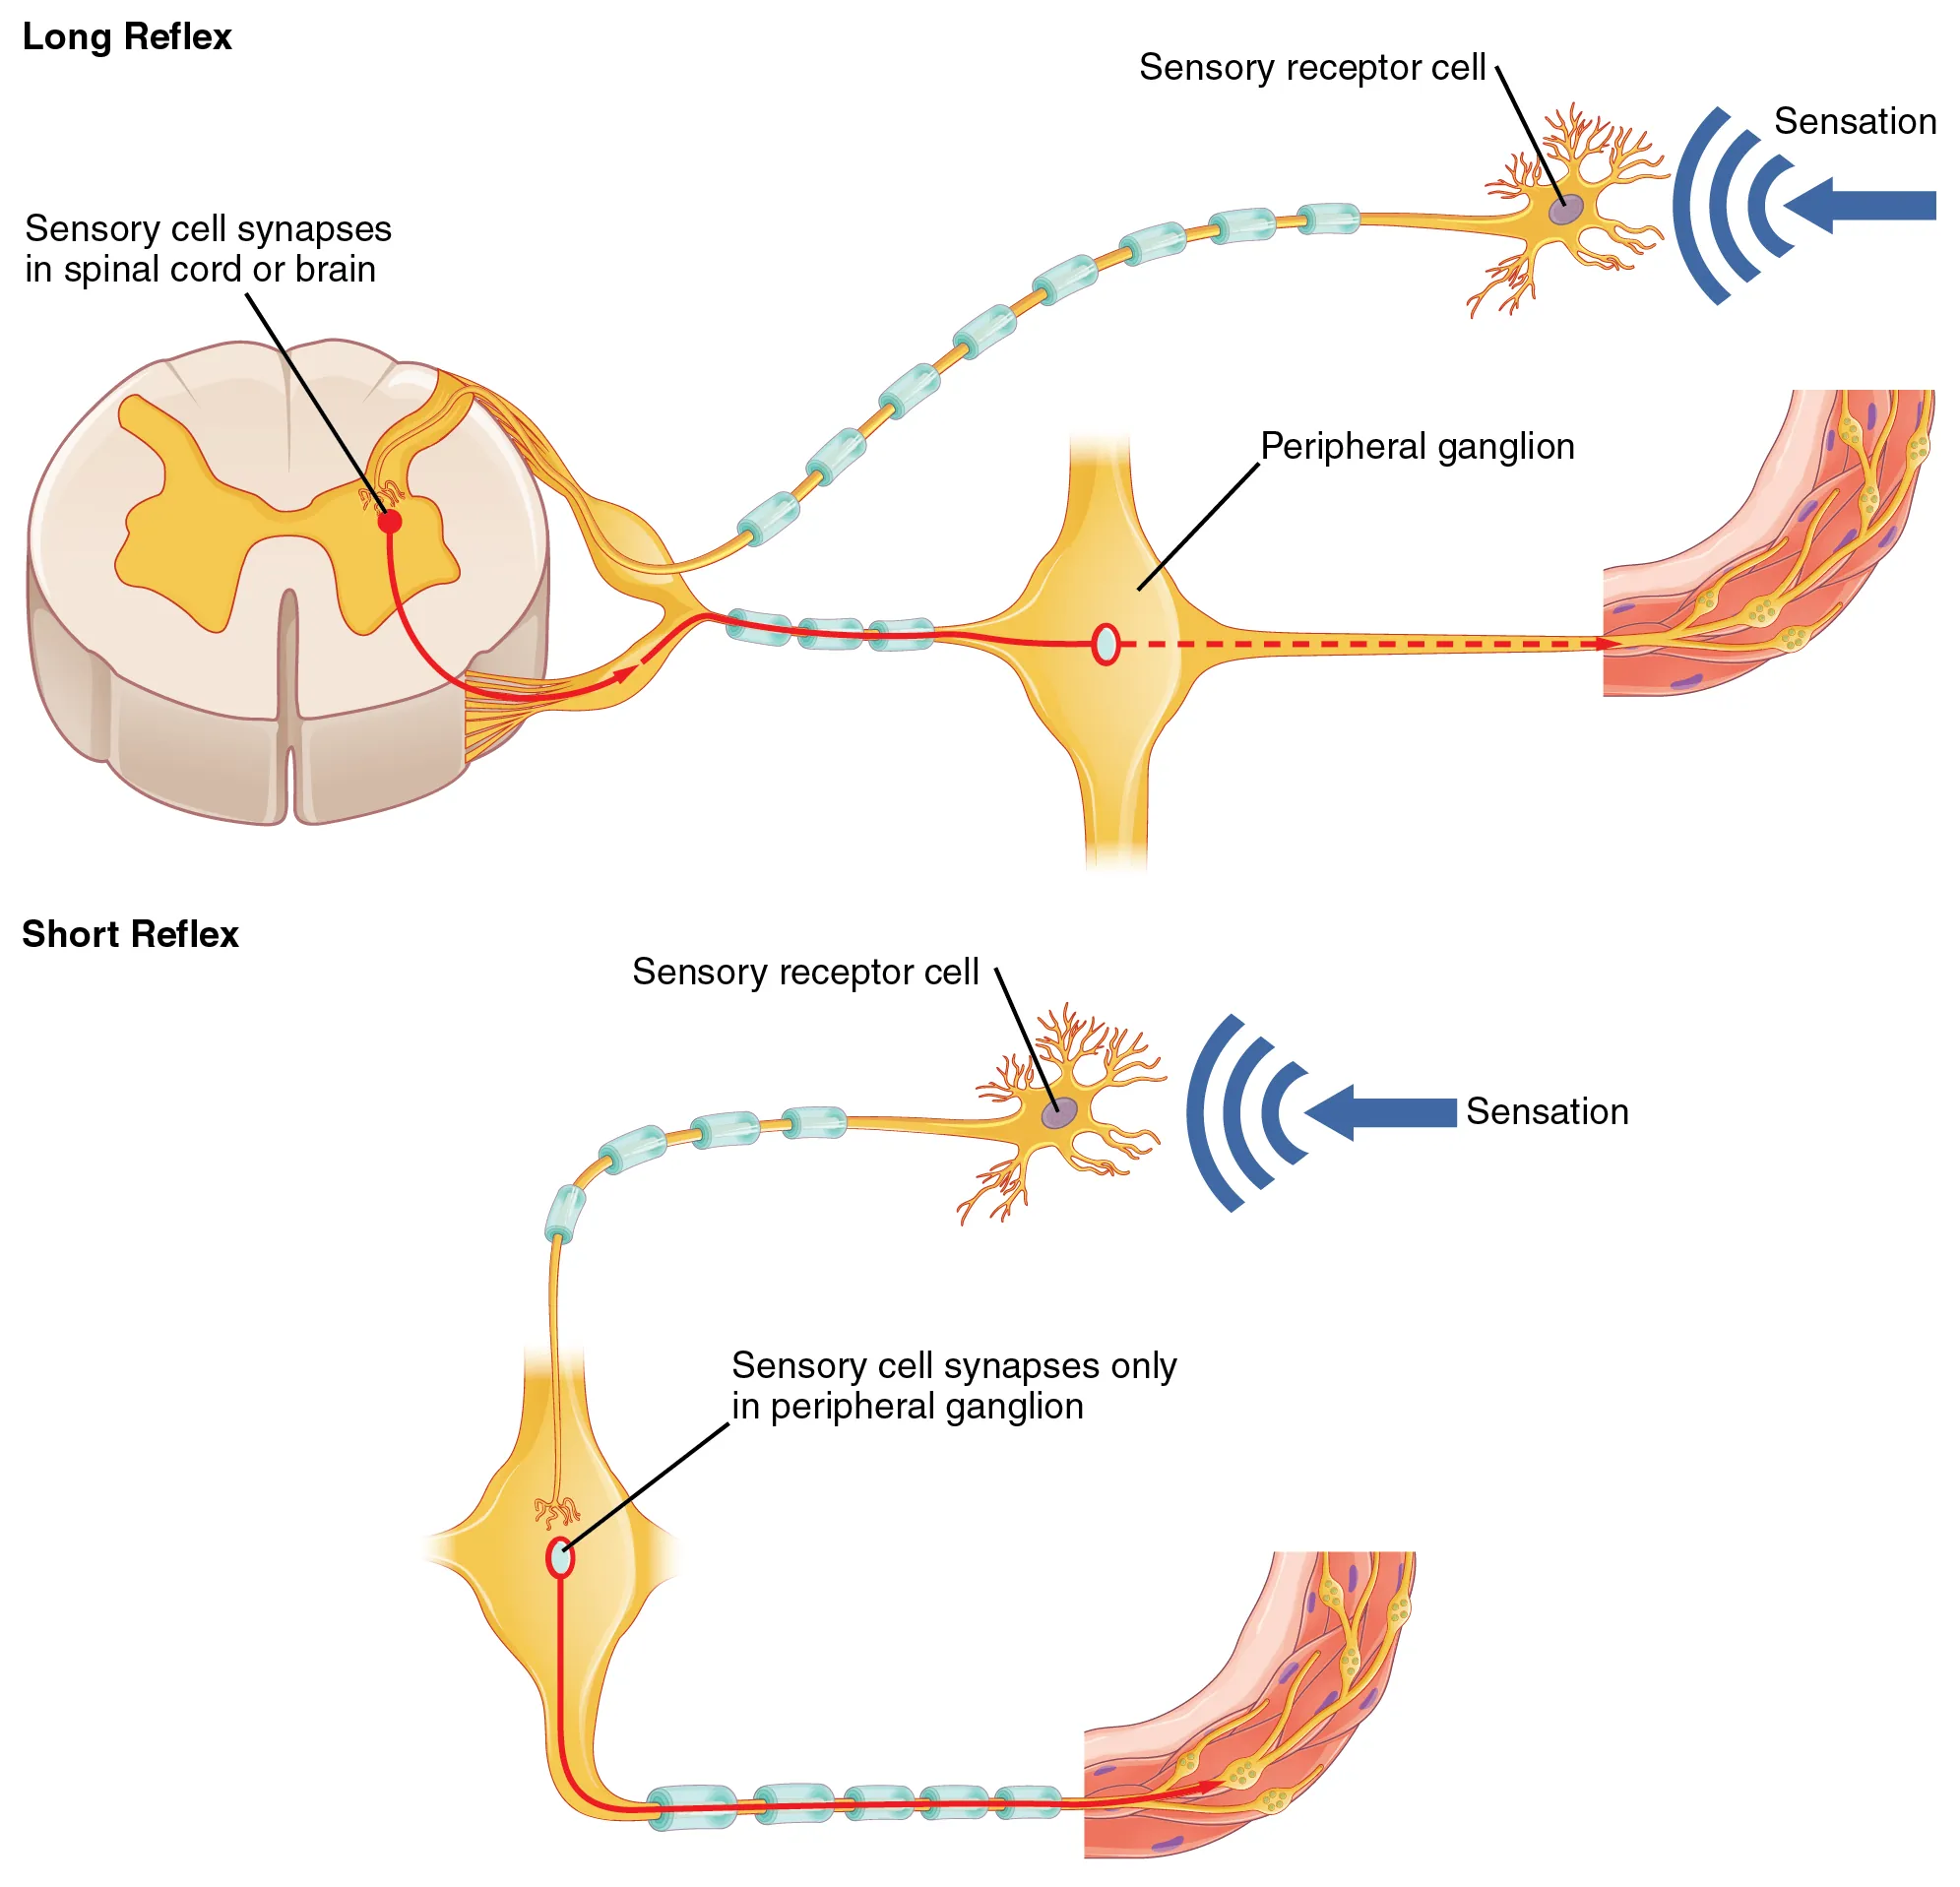 The top panel in this figure shows a long reflex, where the spinal cord is connected to the sensory receptor cell and the peripheral ganglion. The bottom panel shows a short reflex, where the sensory receptor cell is directly connected to the peripheral ganglion.